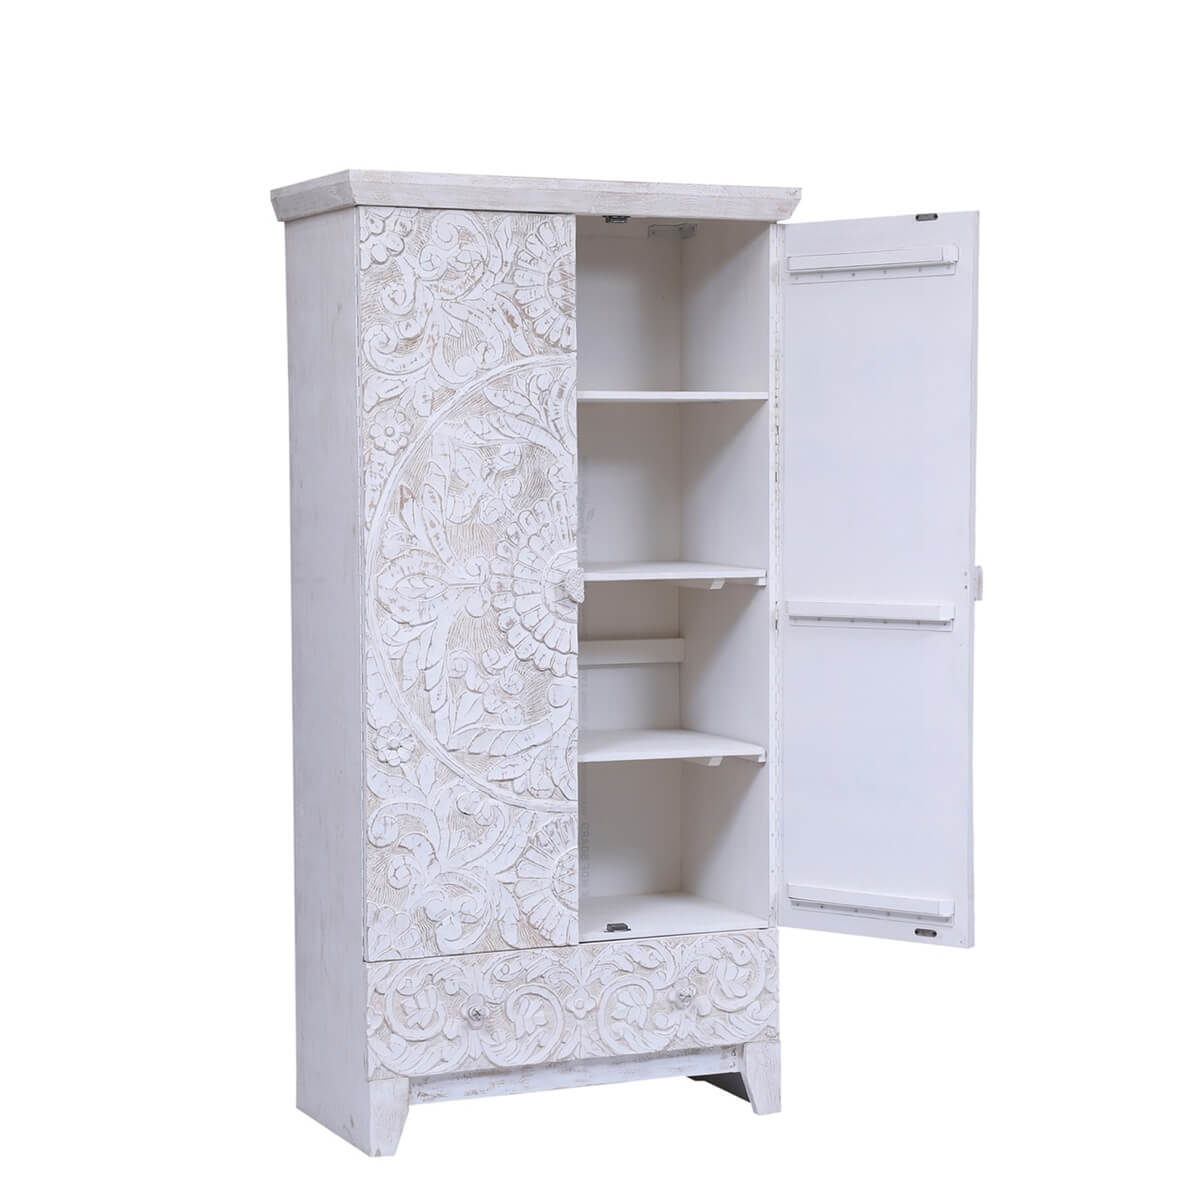 https://www.sierralivingconcepts.com/images/thumbs/0400827_blaria-handcarved-solid-wood-whitewash-armoire-with-drawers.jpeg